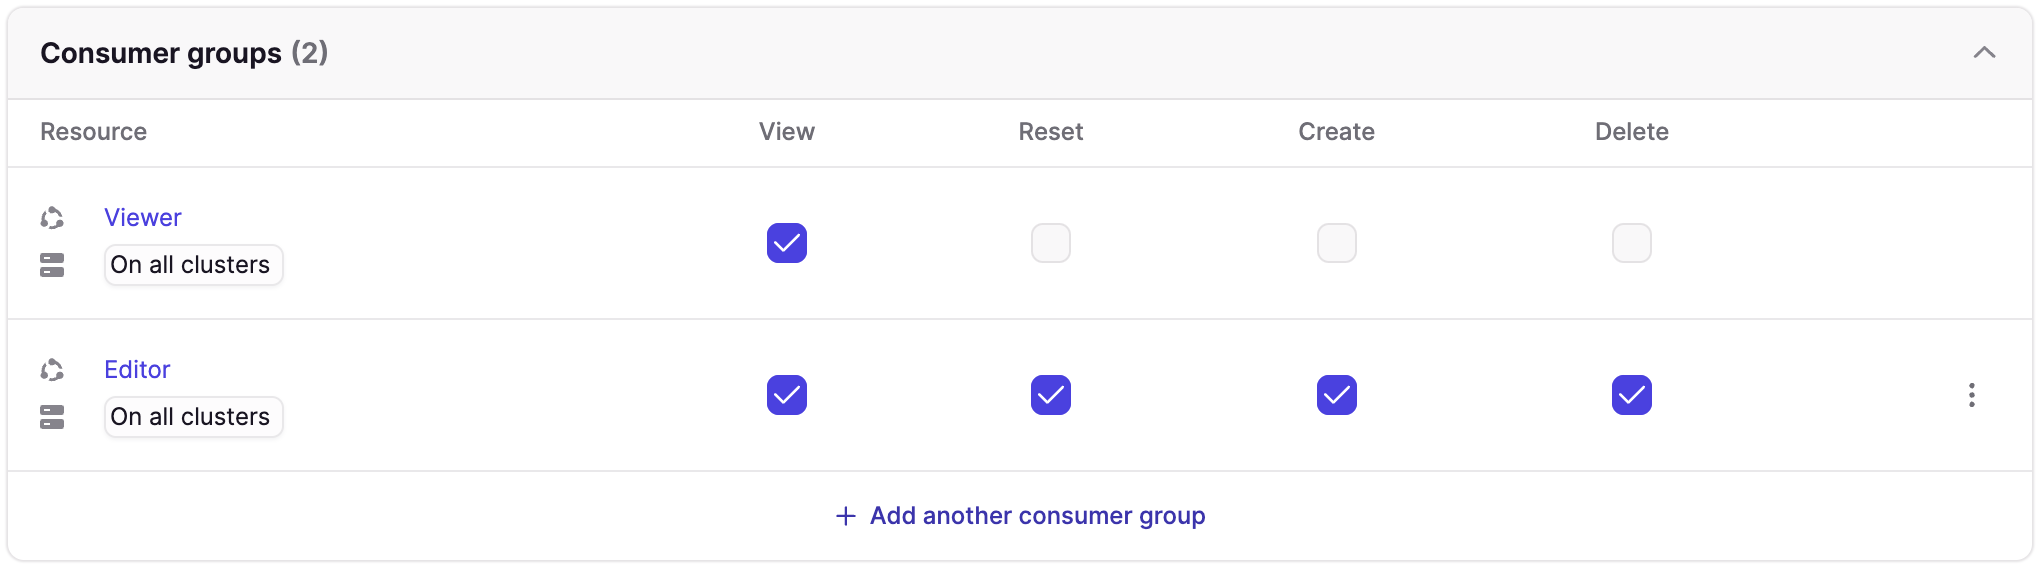 Consumer groups quick select